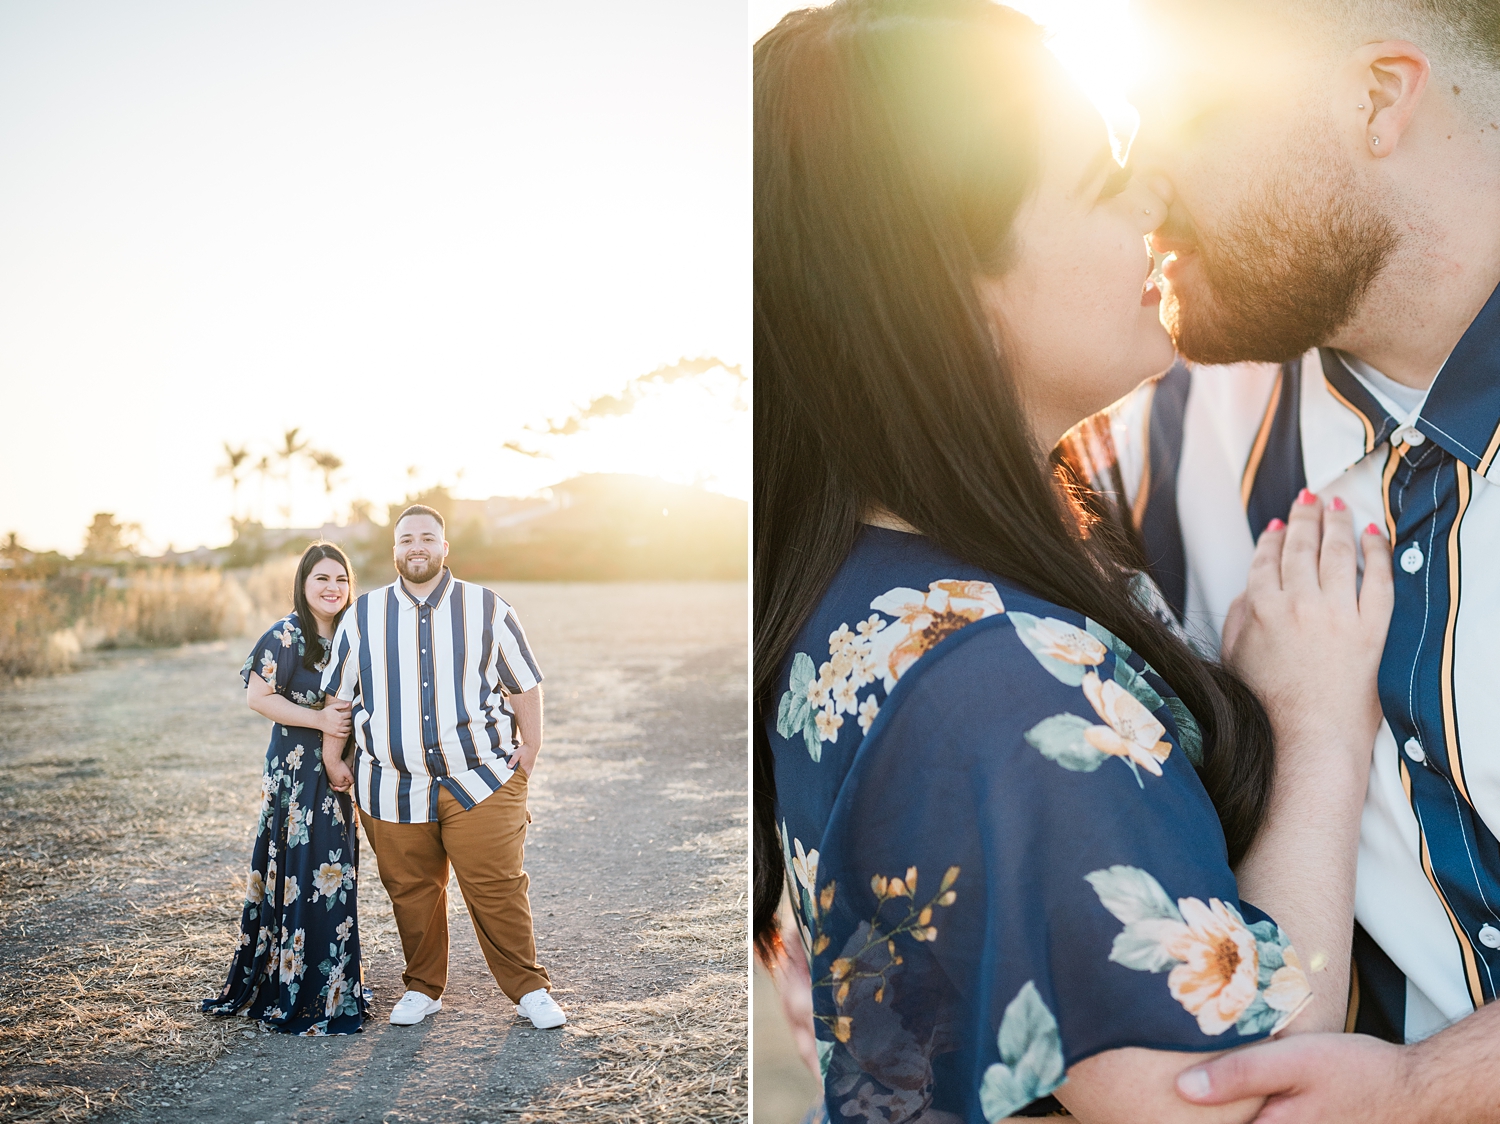 Beach Cliffs Engagement Session at Sunset | Nataly Hernandez Photography | Edwin and Susana-68.jpg